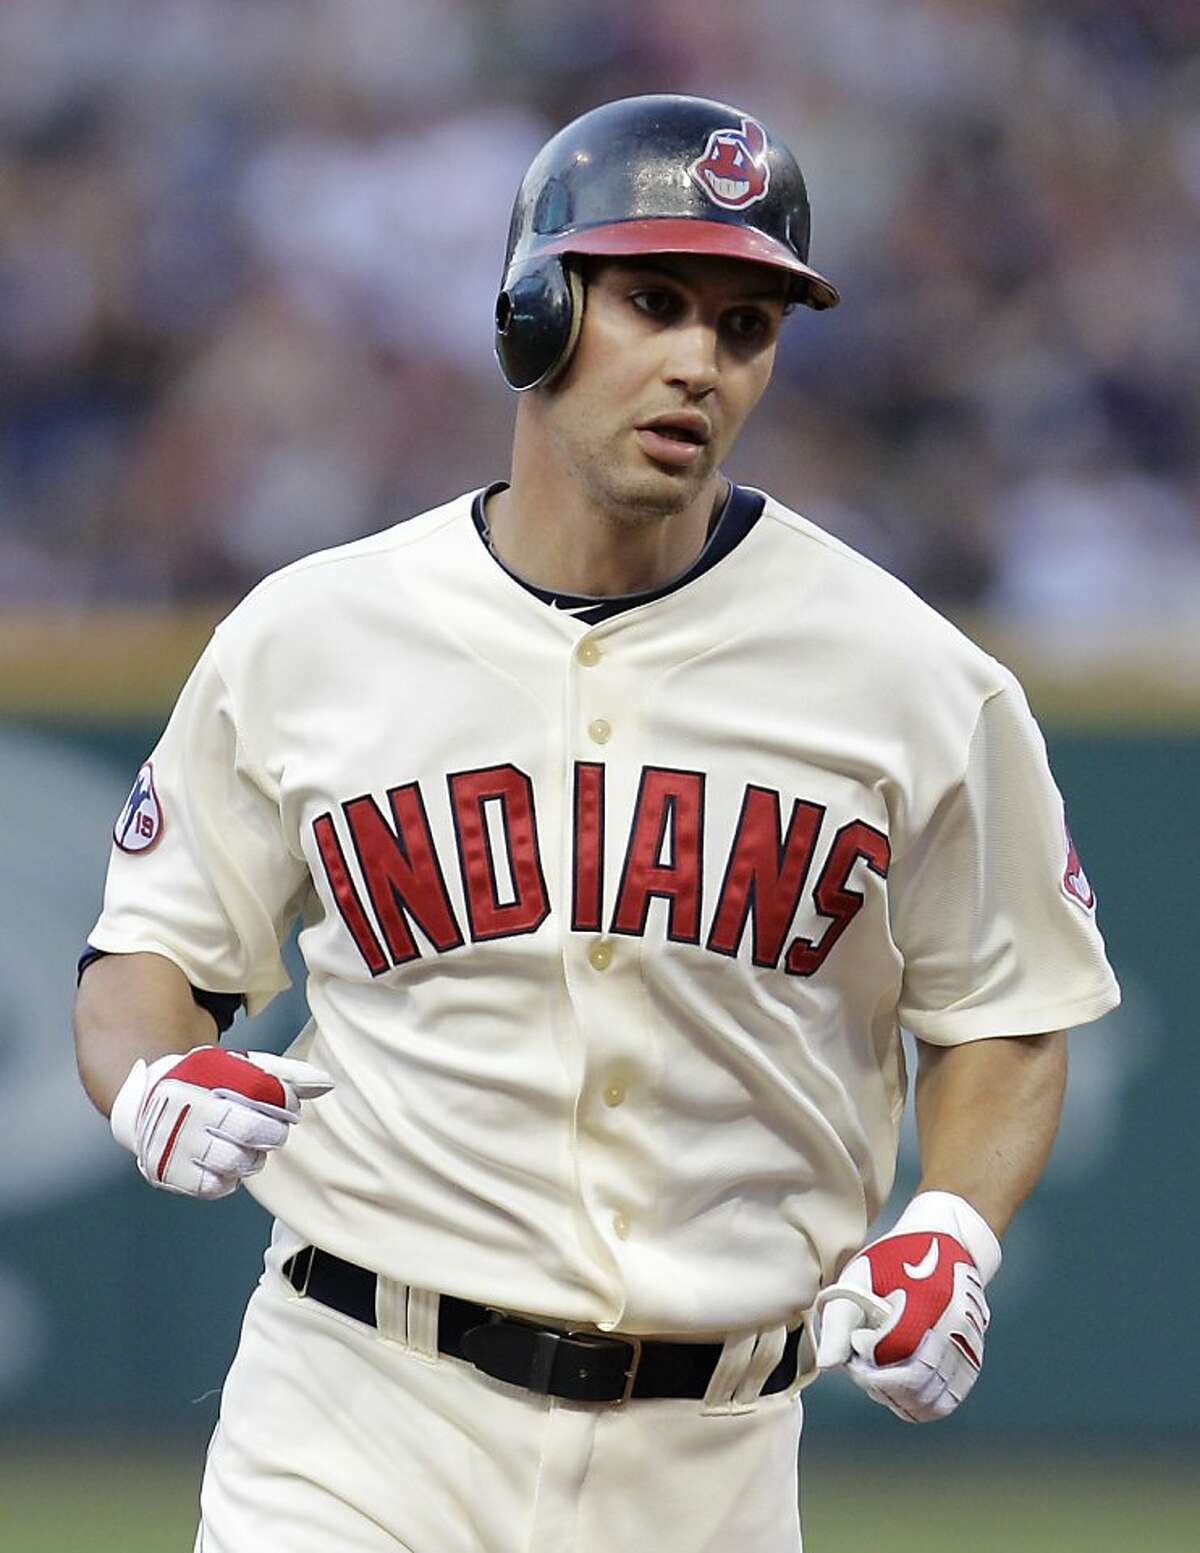 Return Of Grady Sizemore To Indians Is Uncertain